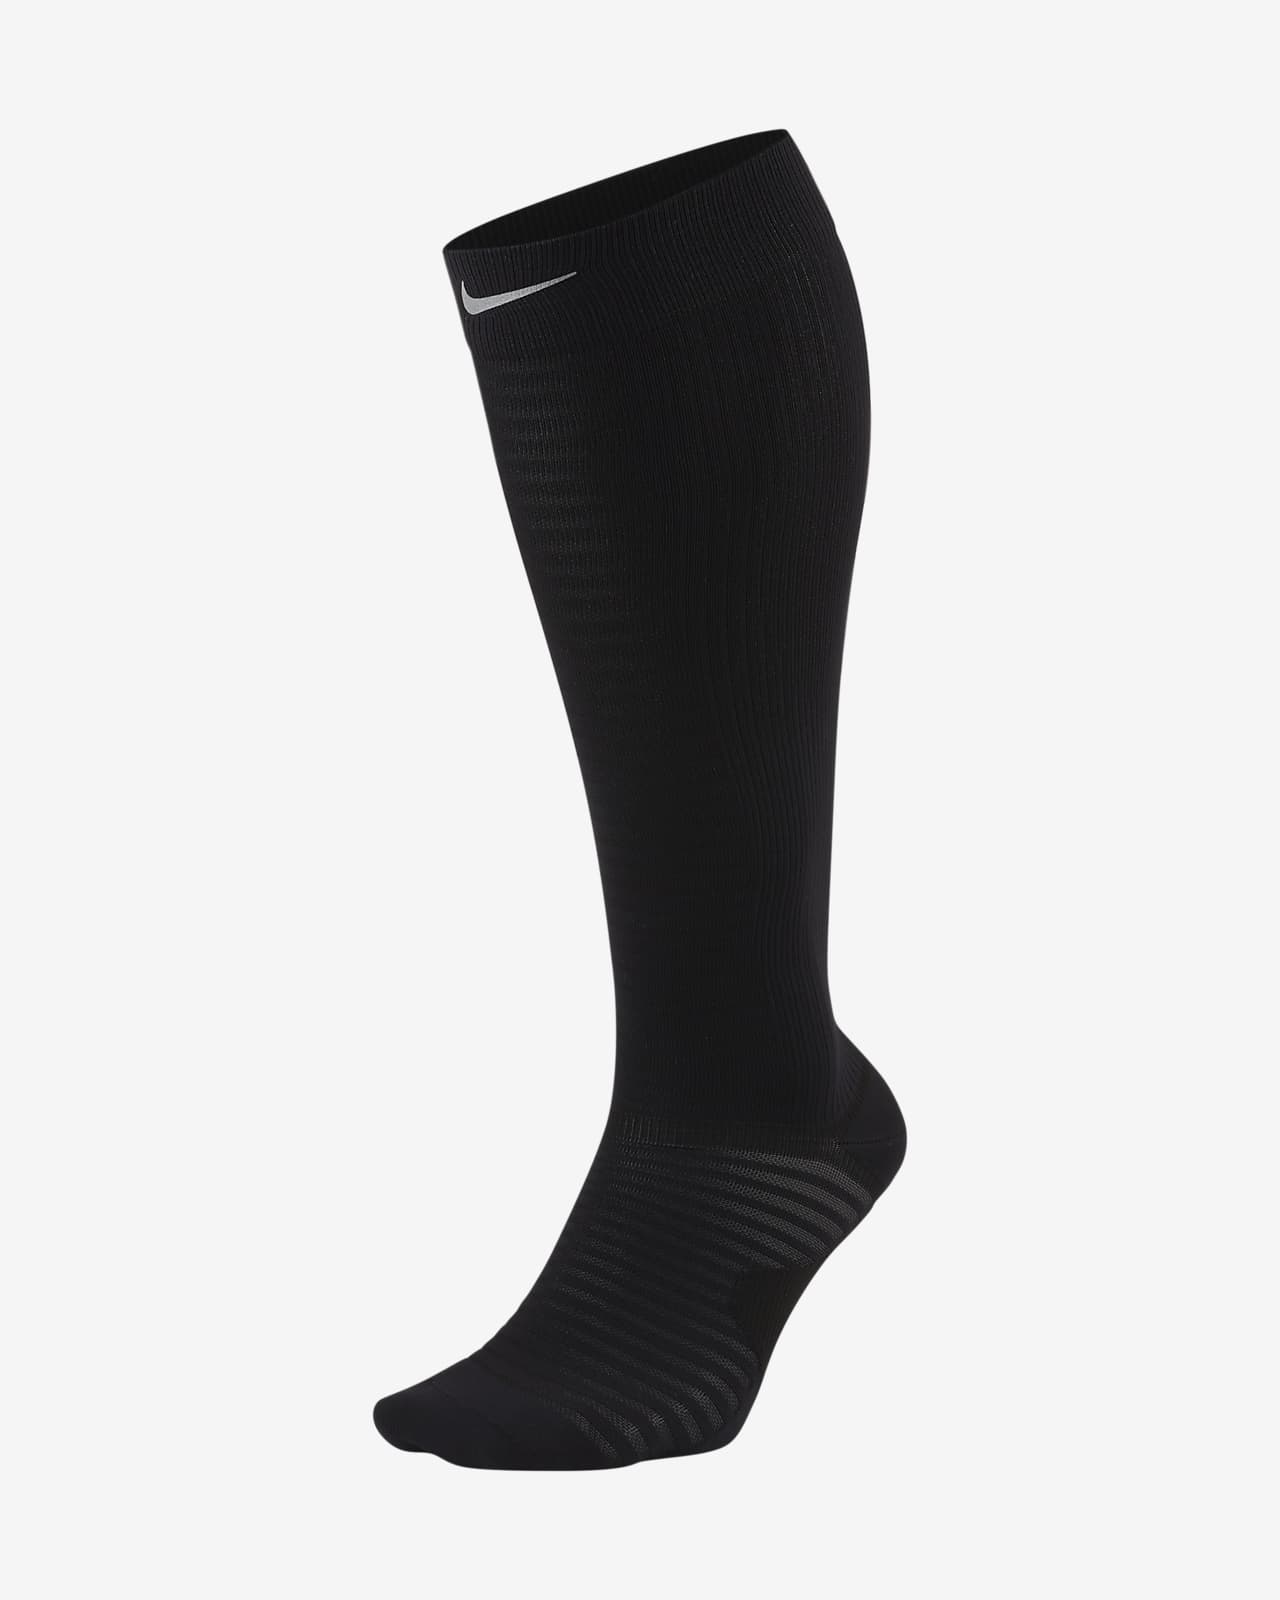 Objetivo Puerto Mantenimiento Nike Spark Lightweight Over-The-Calf Compression Calcetines de running. Nike  ES